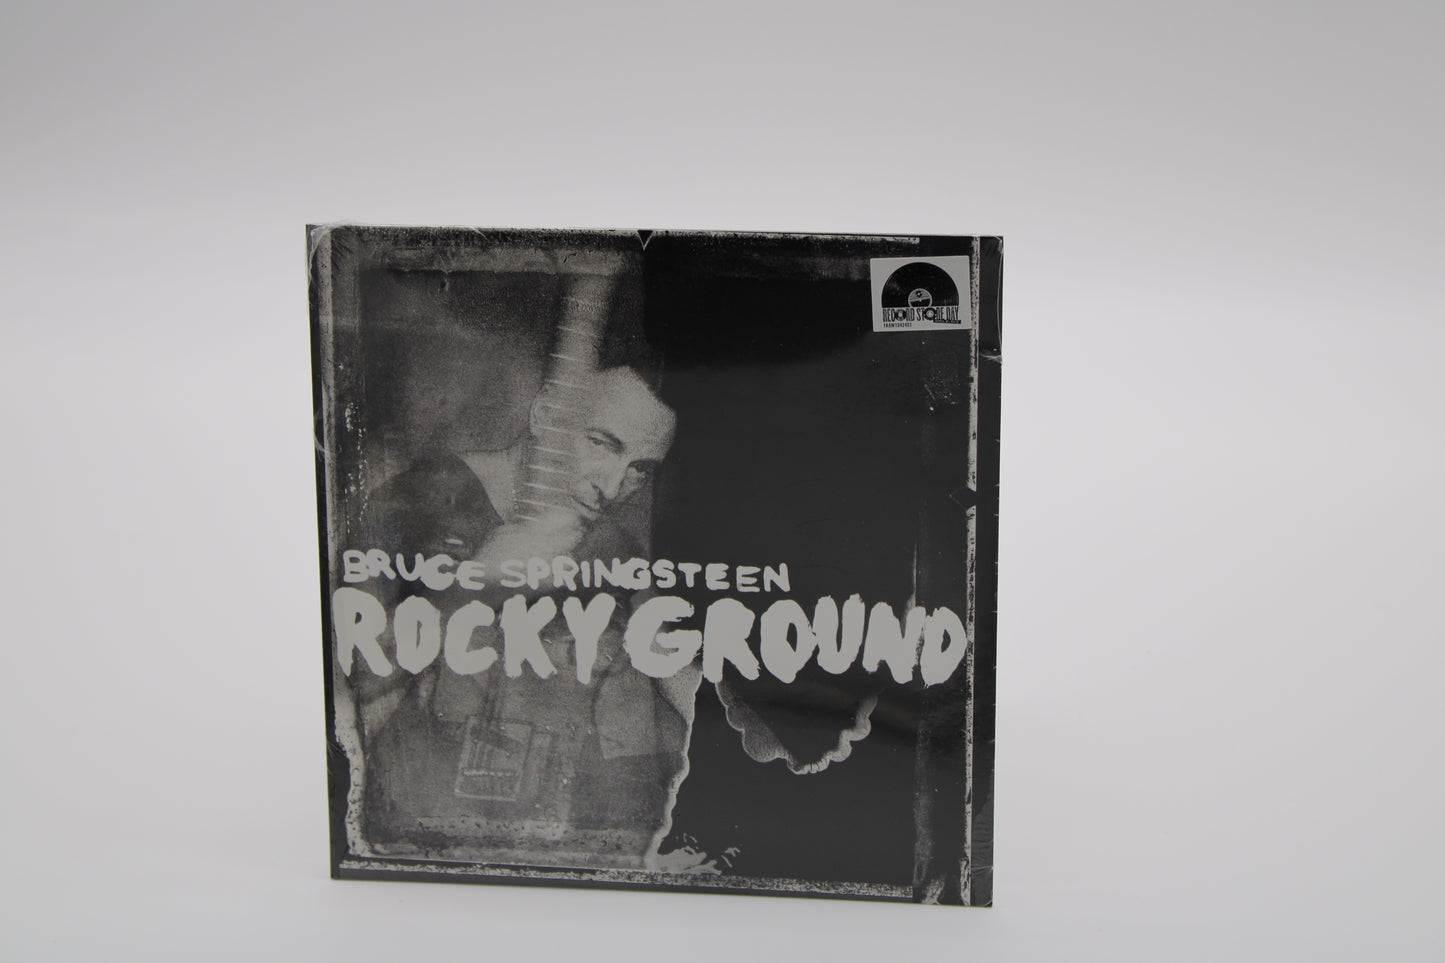 Bruce Springsteen SEALED The Promise (Live) and Rocky Ground - 7" Record Store Day - Sealed Collectible